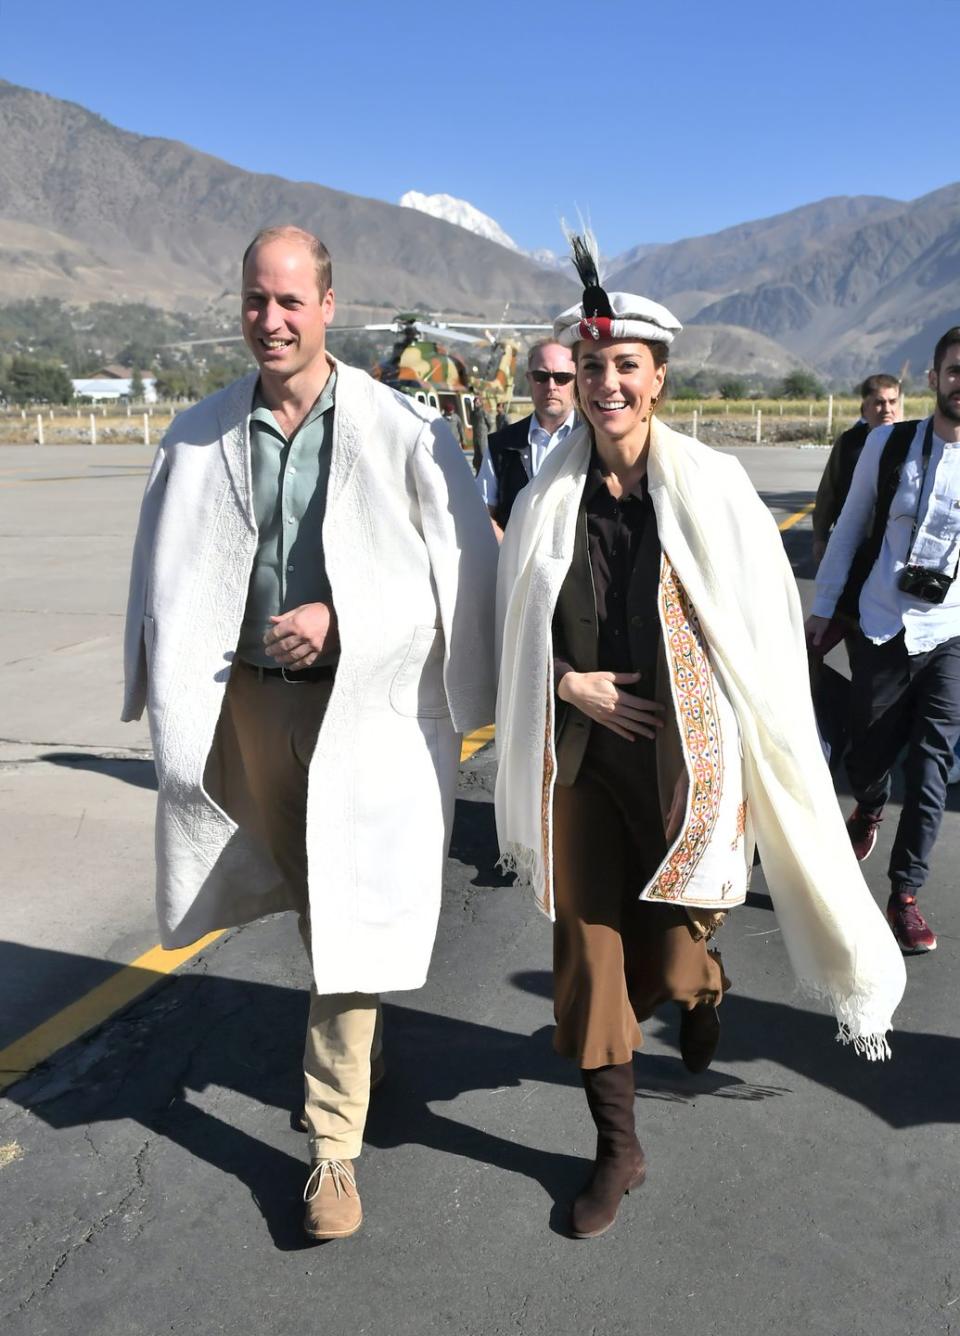 Kate Middleton and Prince William View the Devastating Effects of Climate Change on Pakistan's Glaciers